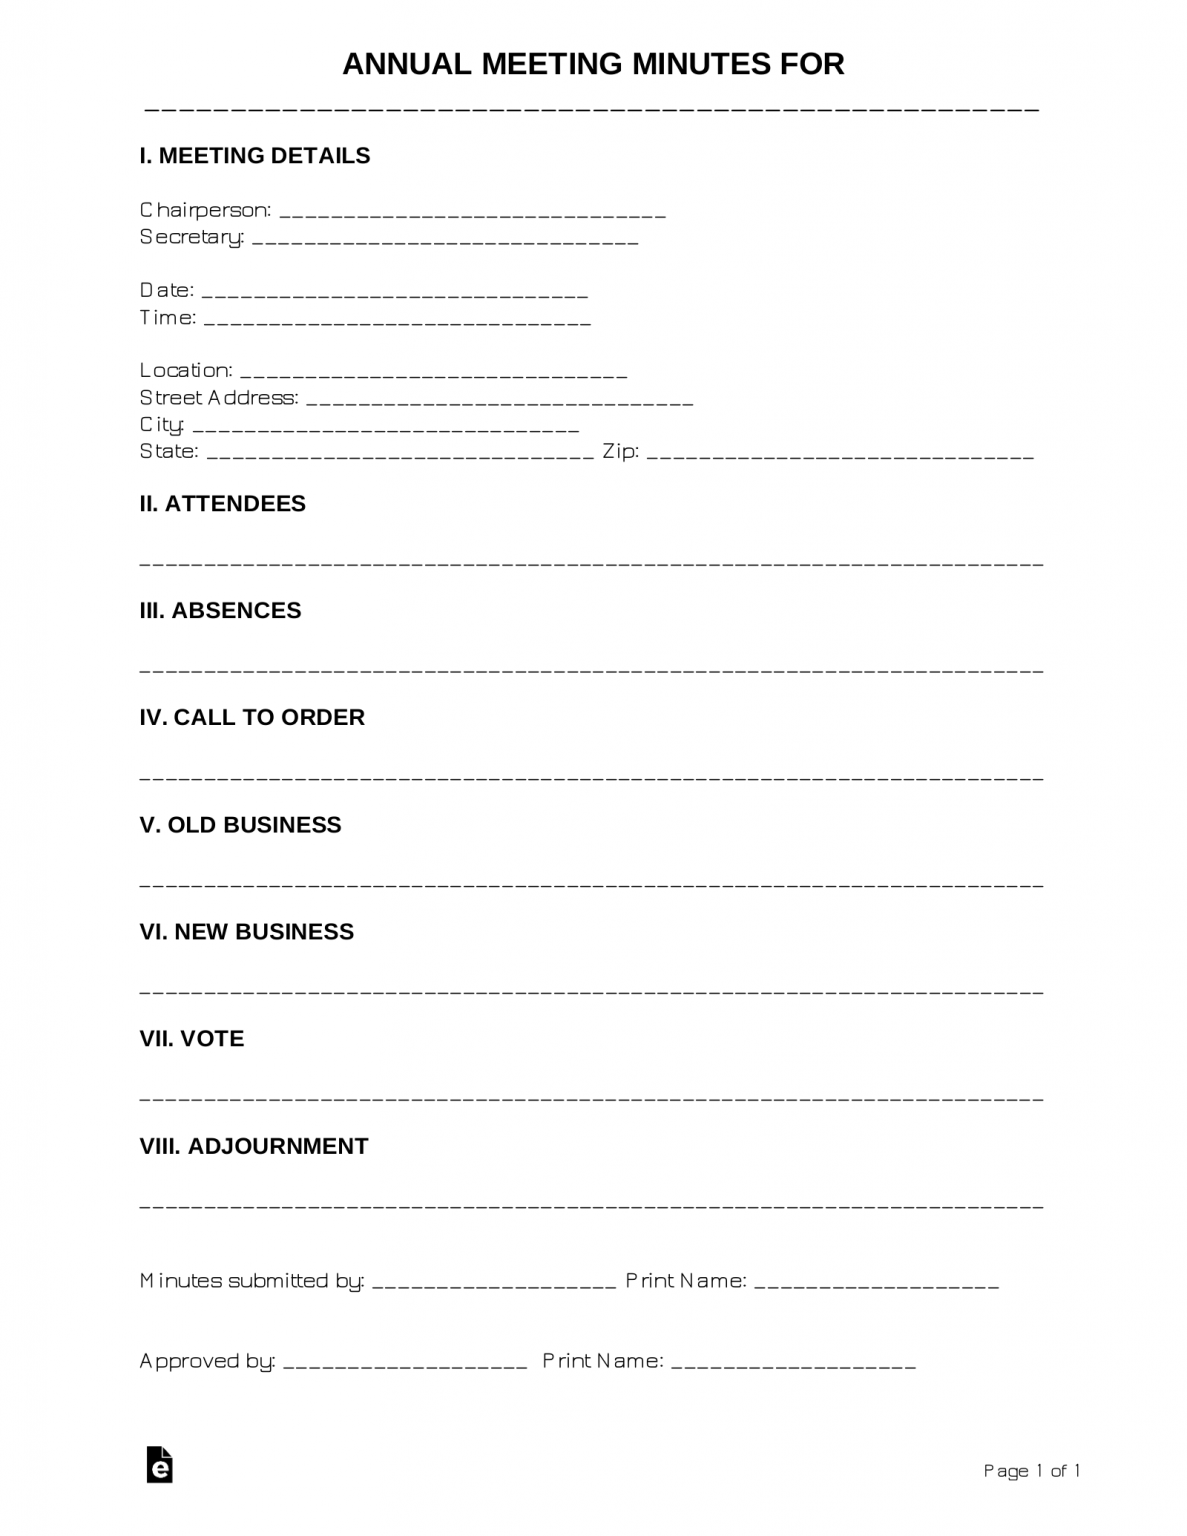 free-annual-meeting-minutes-template-sample-pdf-word-eforms